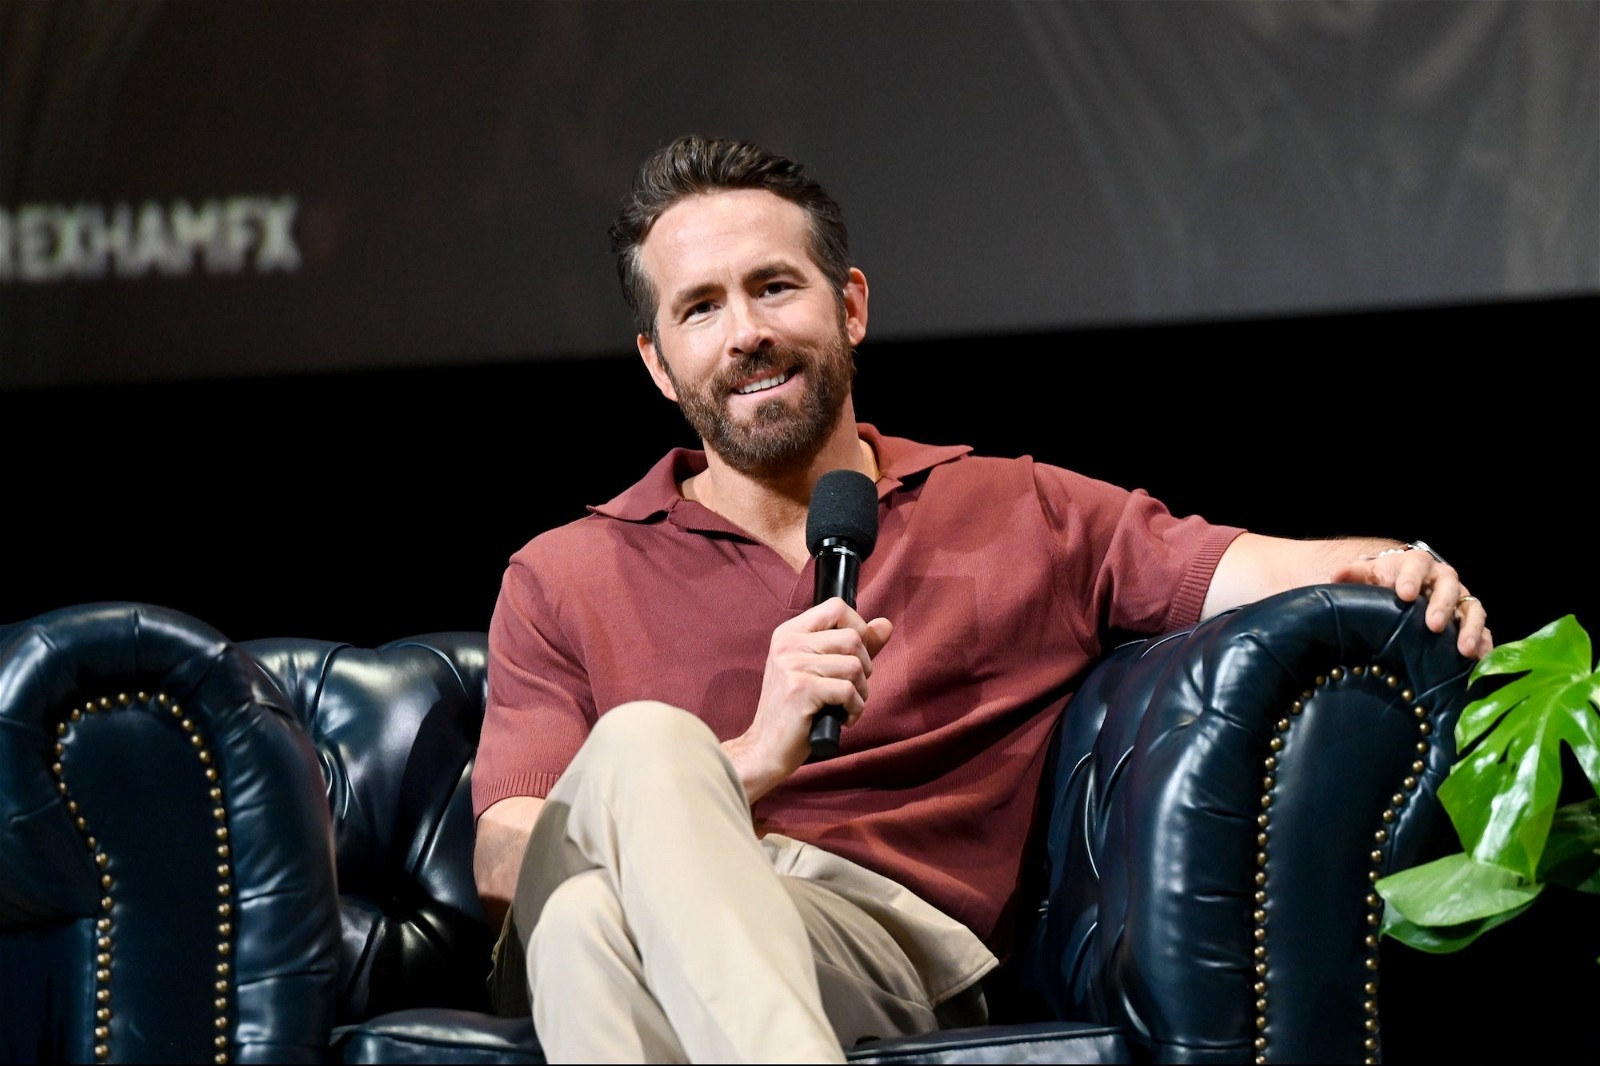 Ryan Reynolds has openly talked about his struggles with anxiety